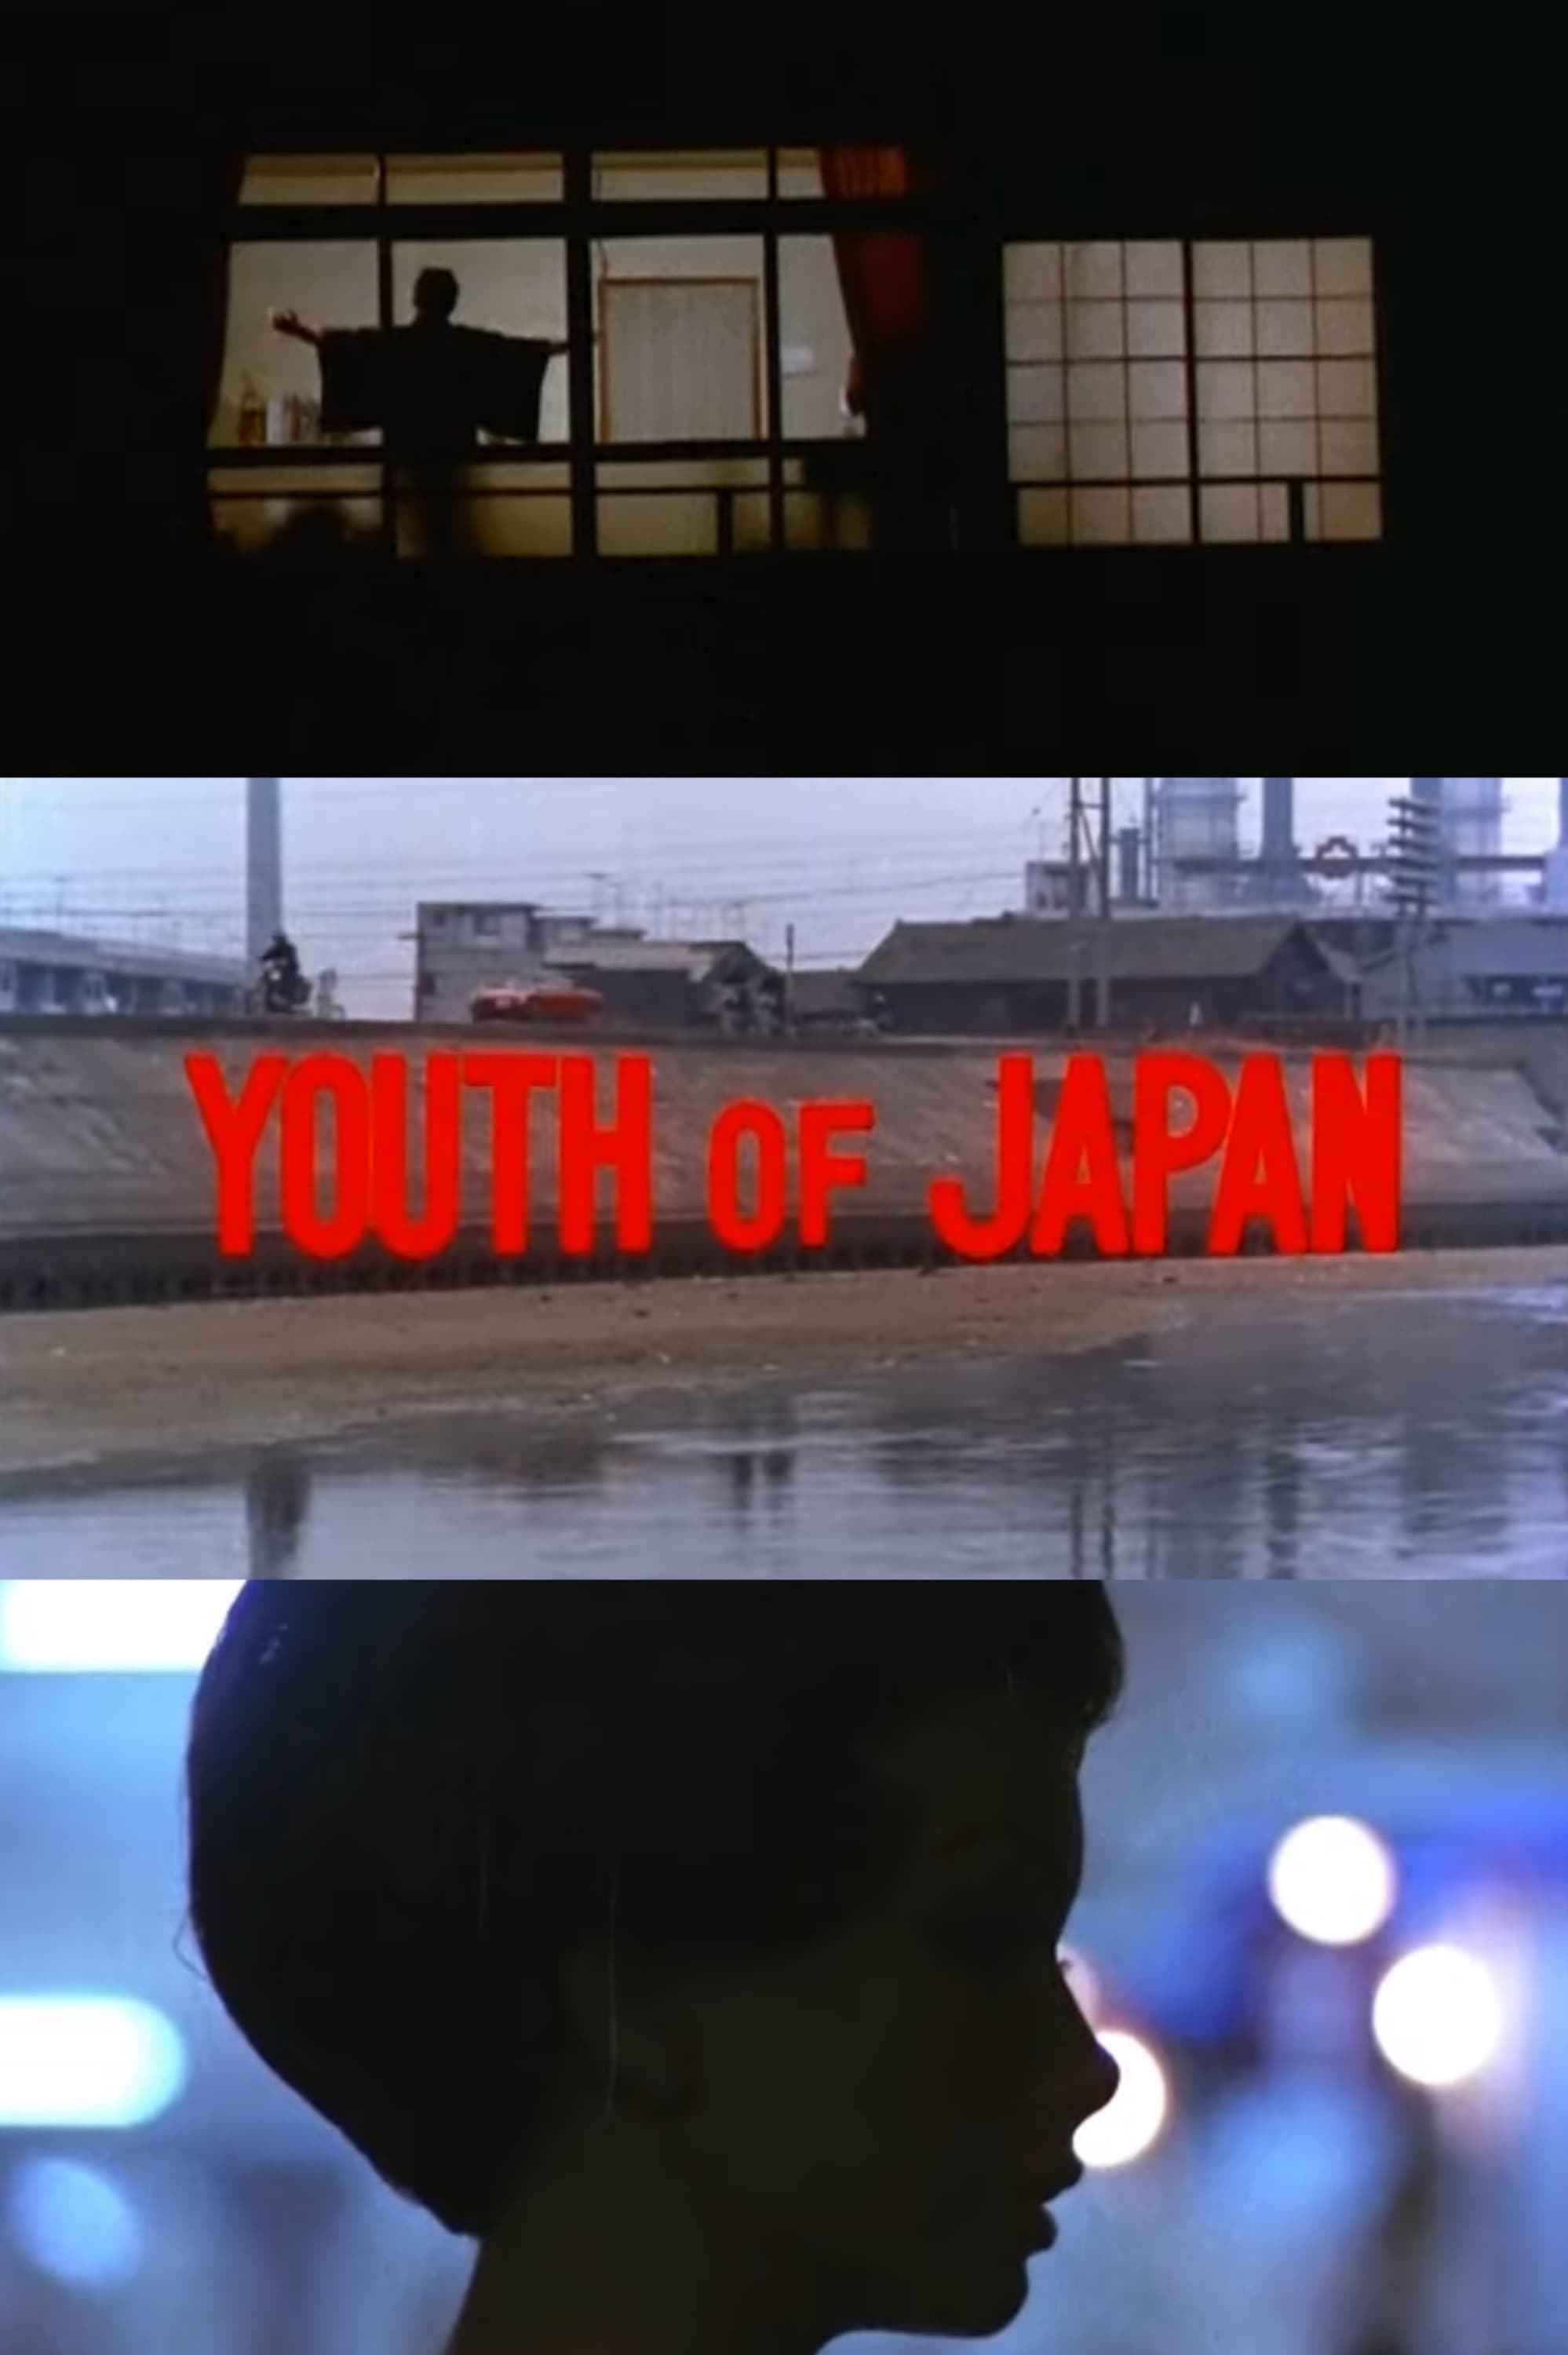 Youth of Japan